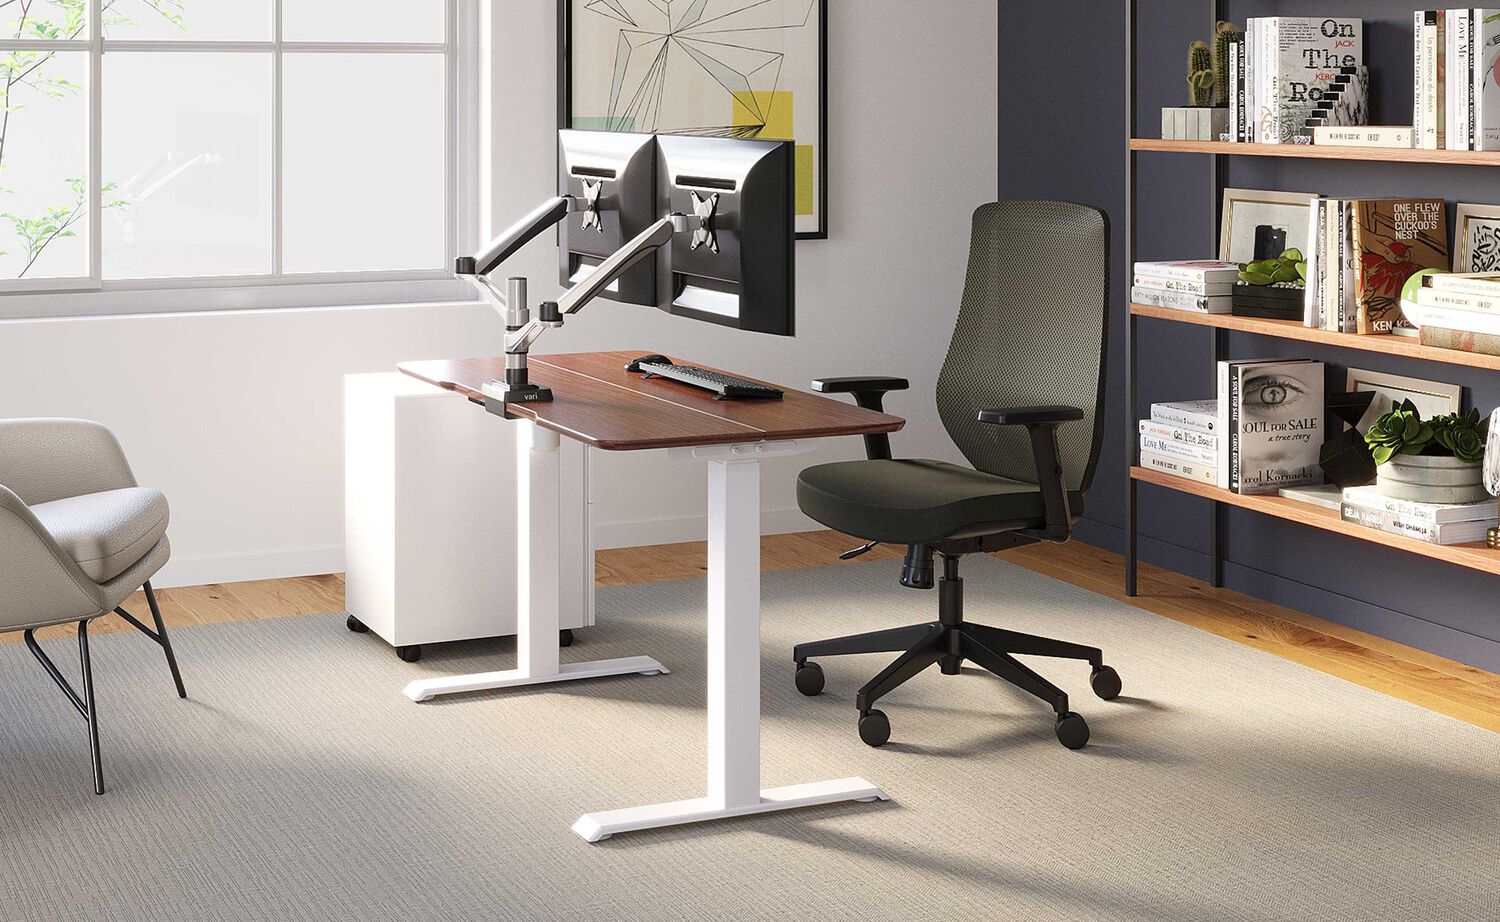 vari essential electric standing desk split top in office environment with accessories